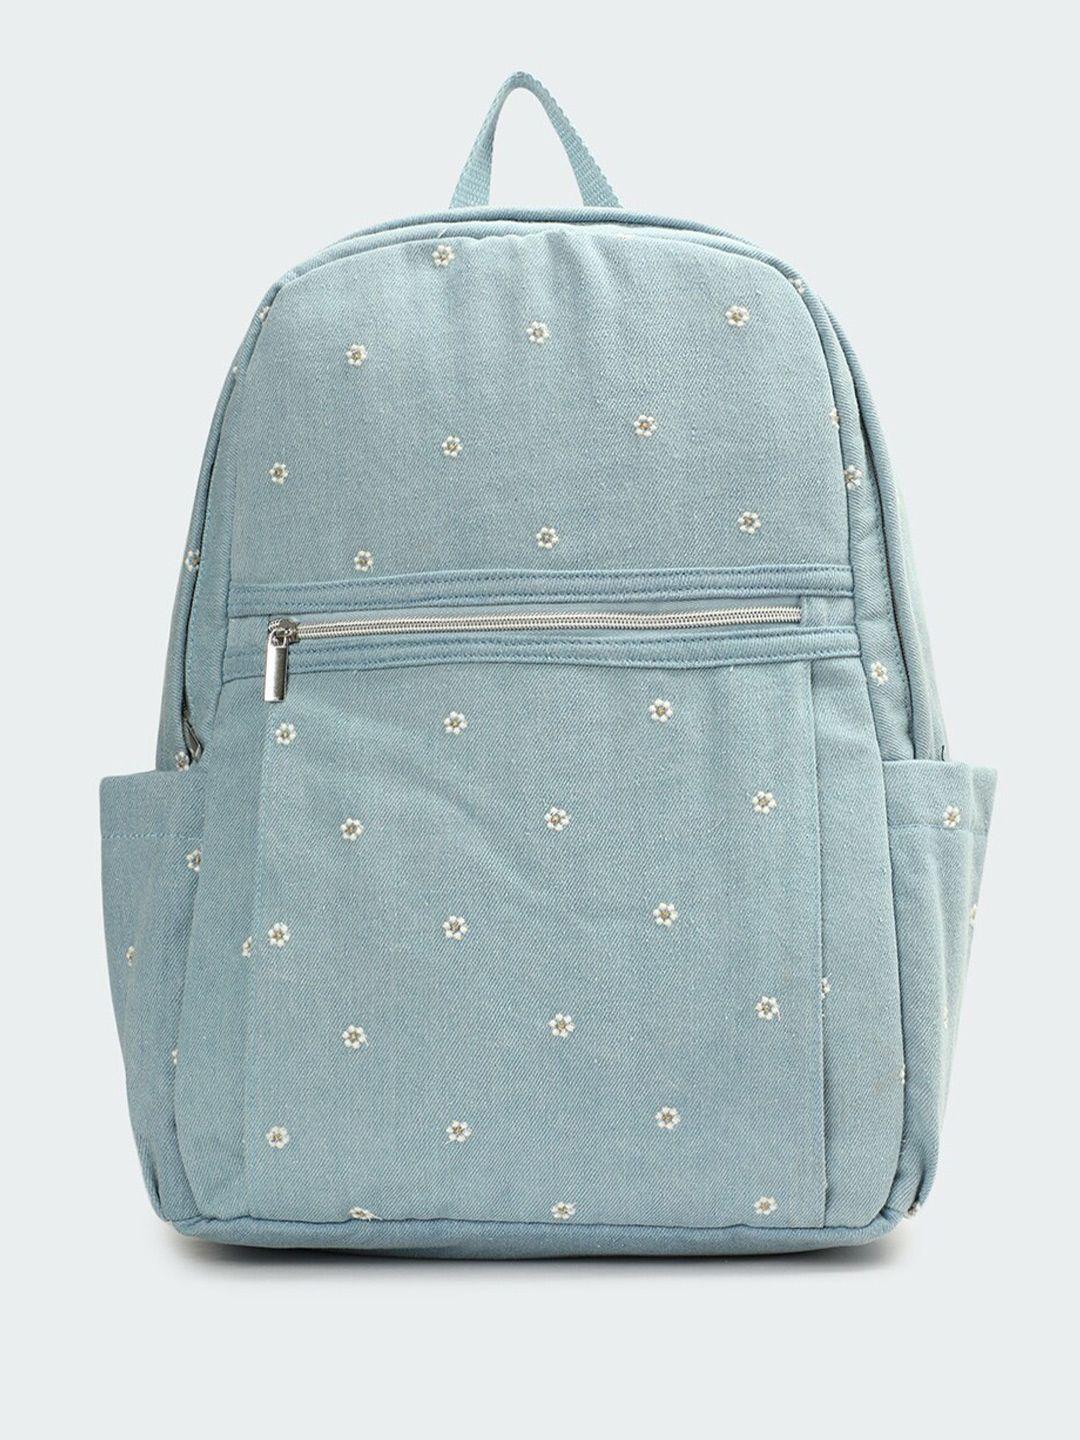 max women floral printed cotton denim backpack